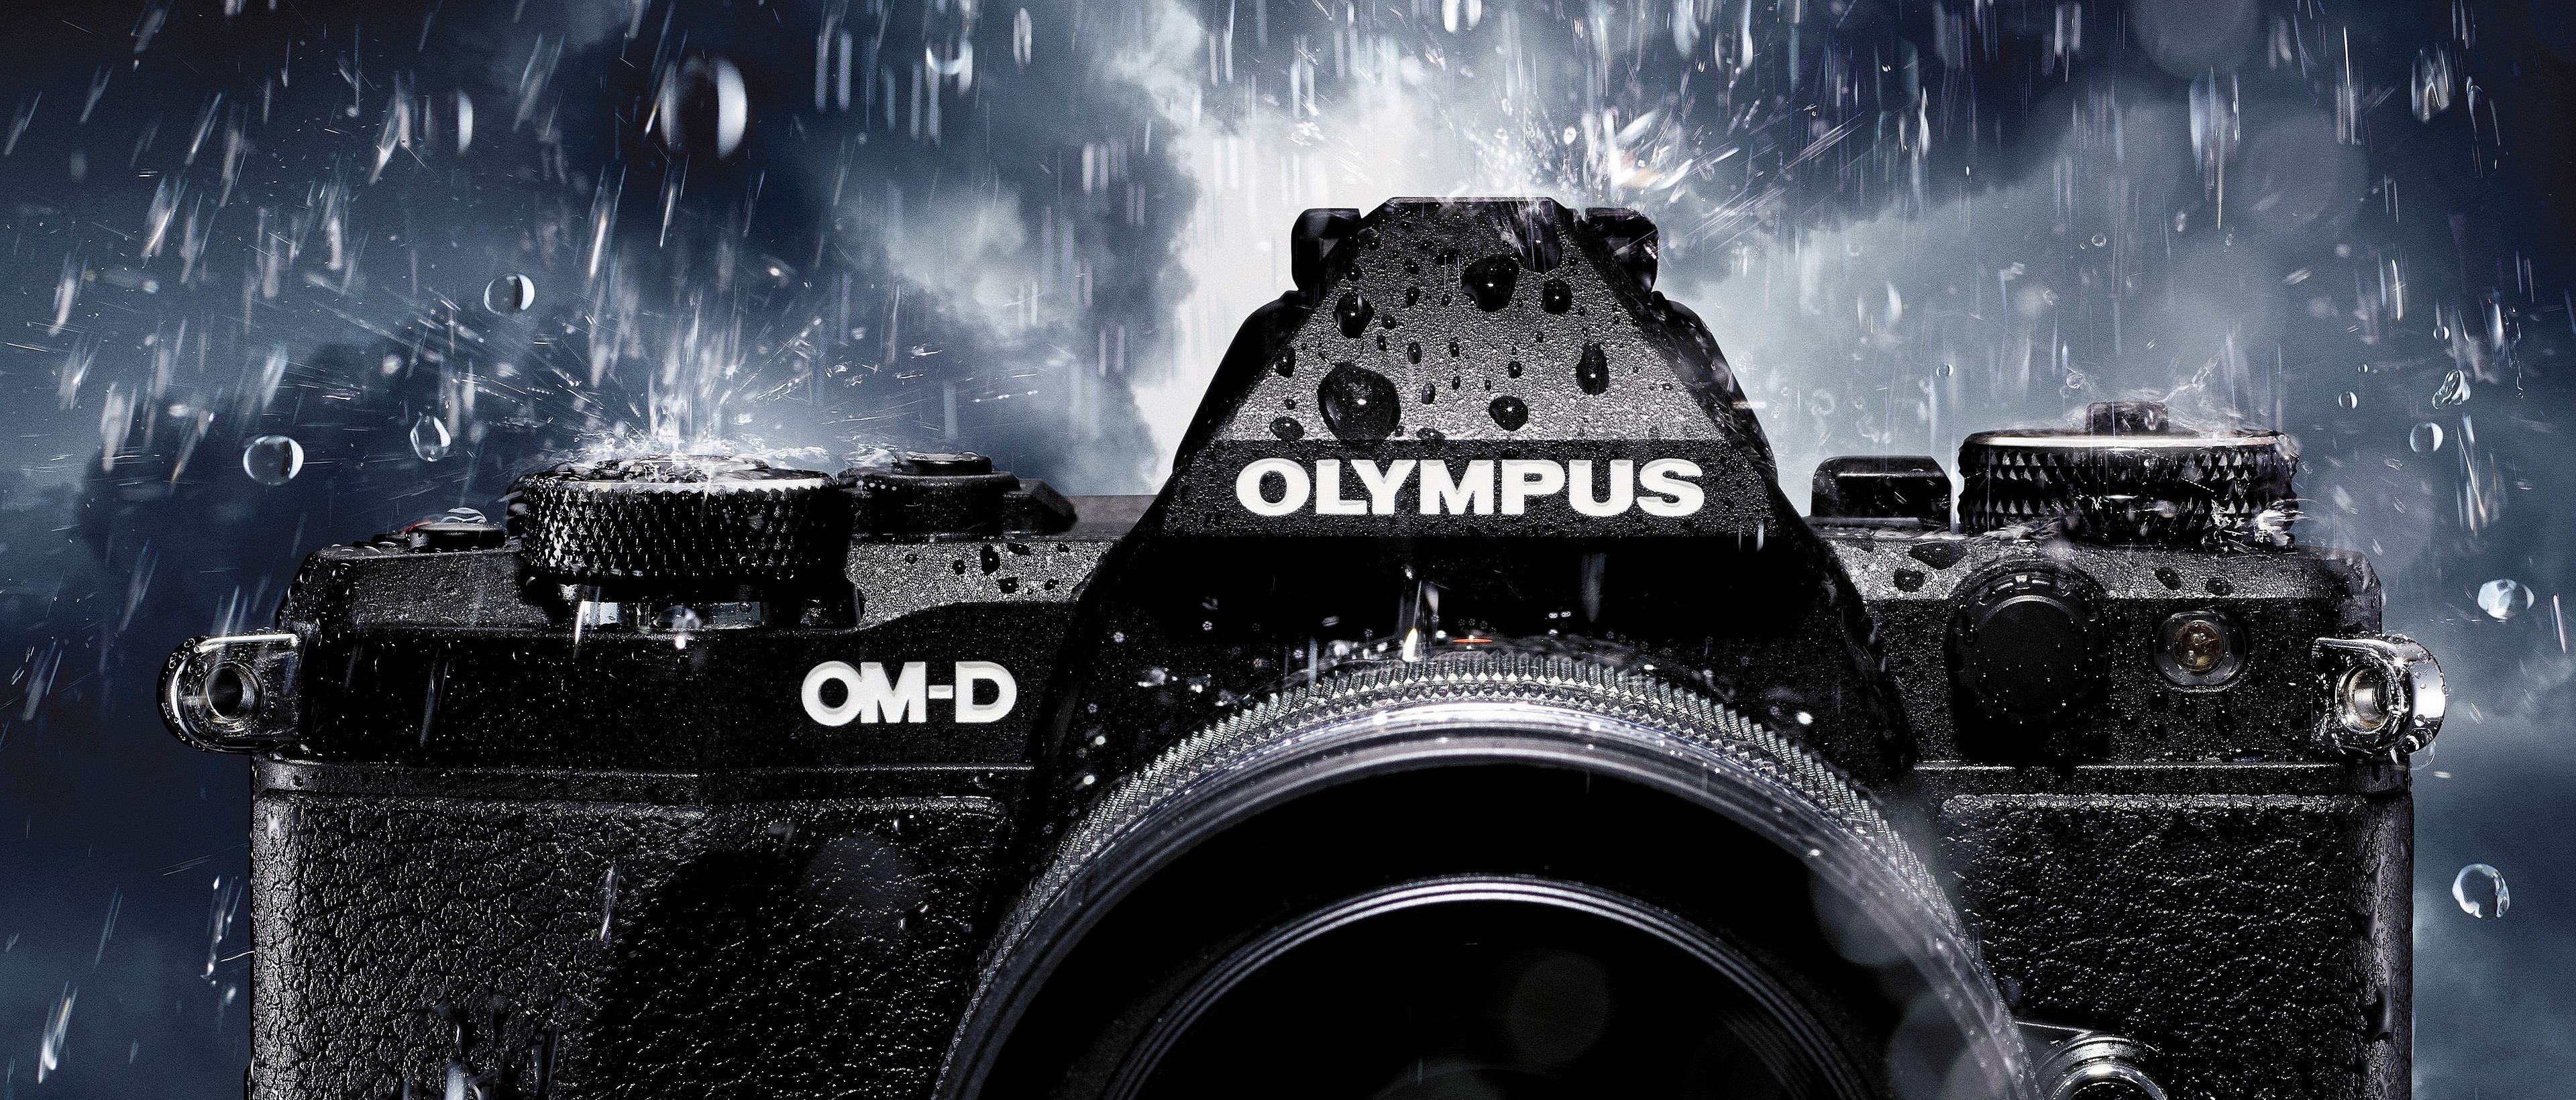 Preview Image: Olympus Cashback